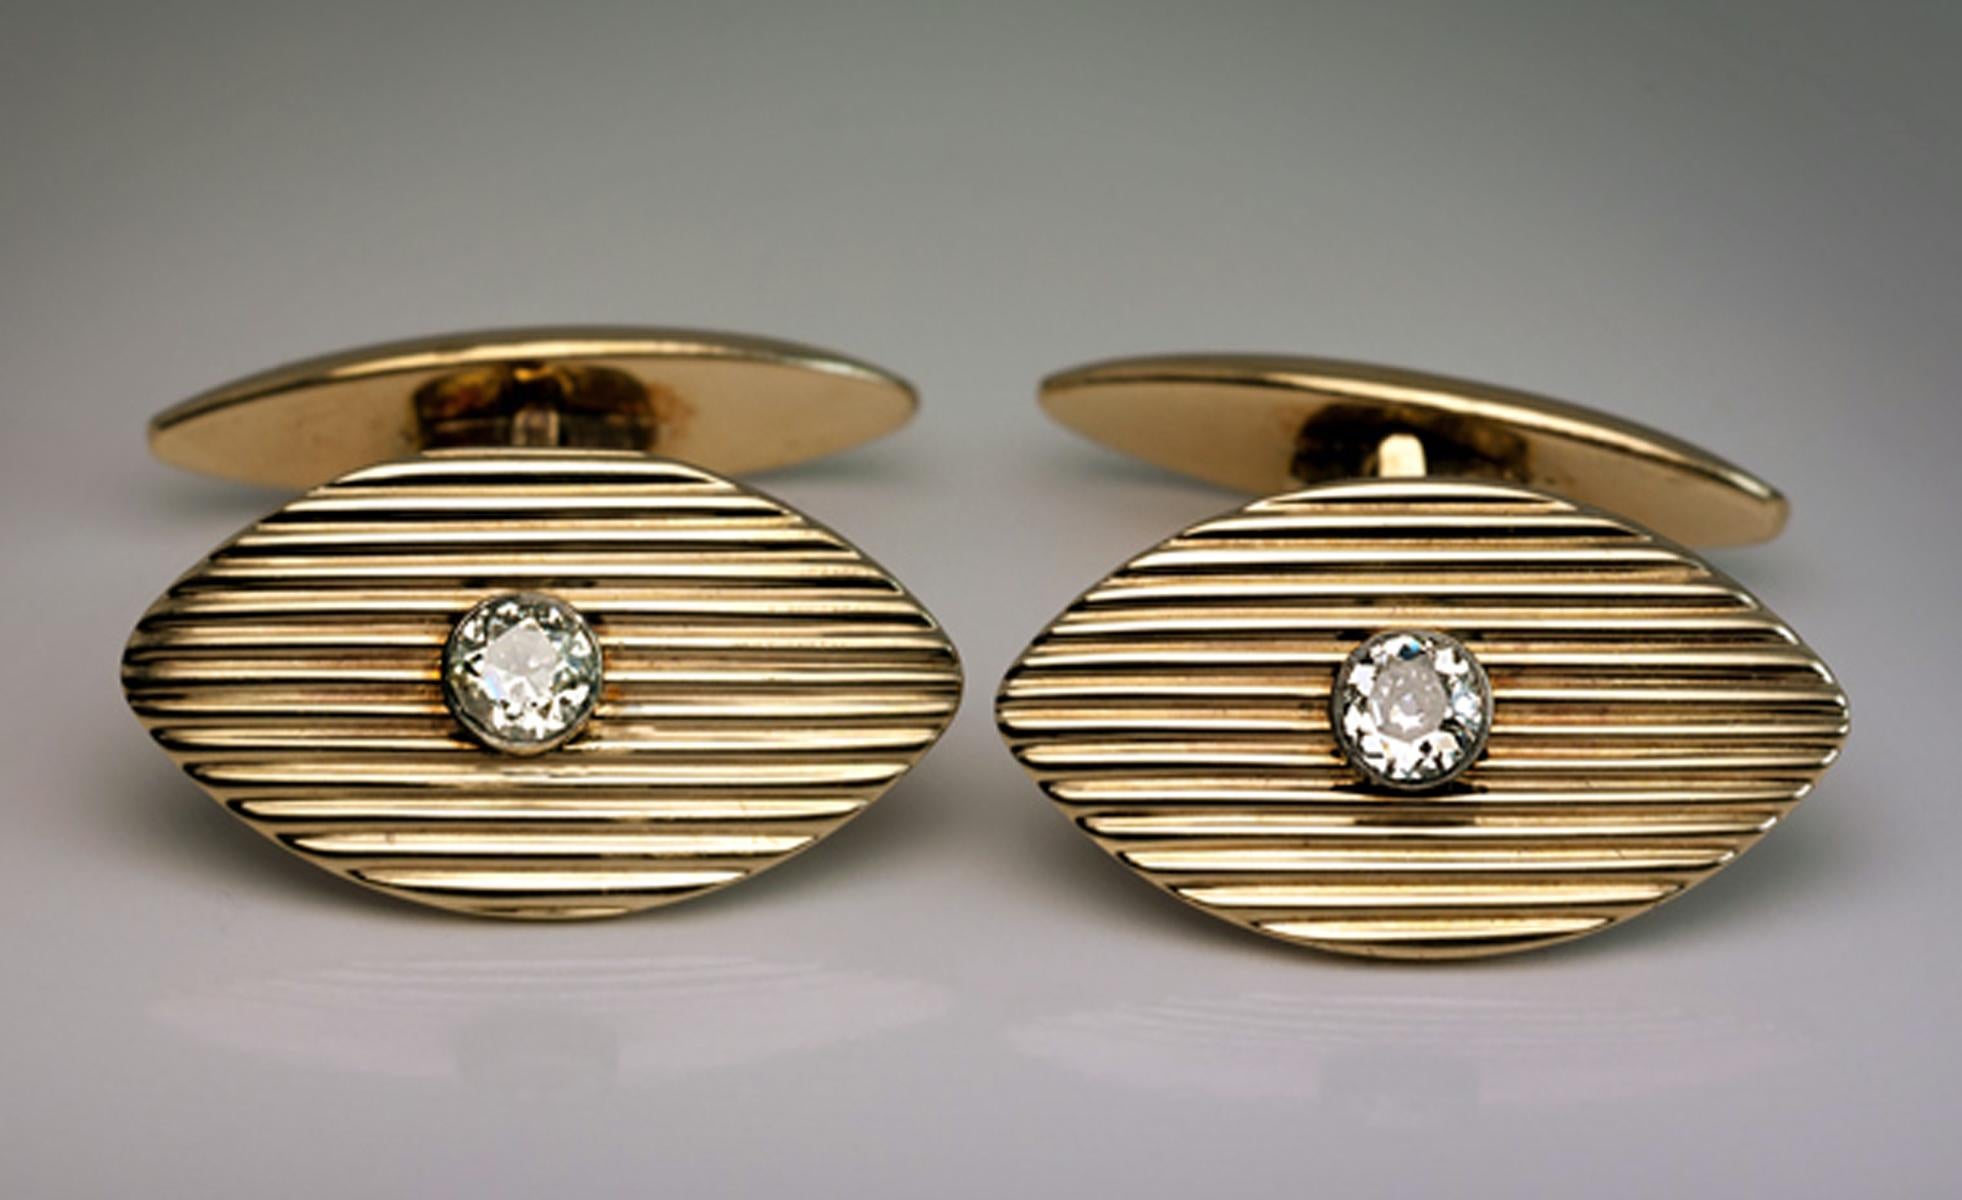 A pair of antique Russian ribbed gold and diamond cufflinks by Joseph Marshak

Made in Kiev between 1908 and 1917

Joseph Marshak (1854-1918), one of Faberge's competitors, was a prominent jeweler in Imperial Russia. The firm is known today as